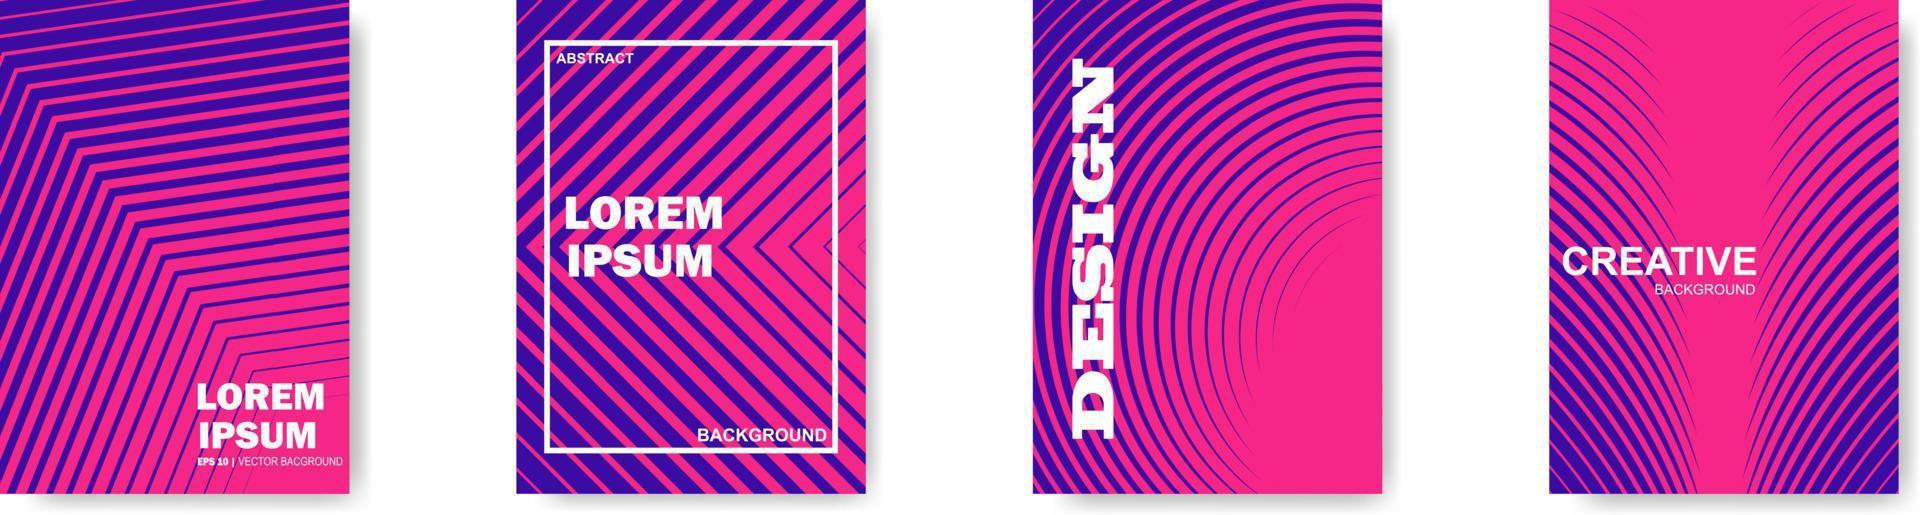 halftone gradation on minimalist cover design.  background, pattern, abstract, vector, line, design, color, gradient, graphic, modern, shape, cool, cover vector